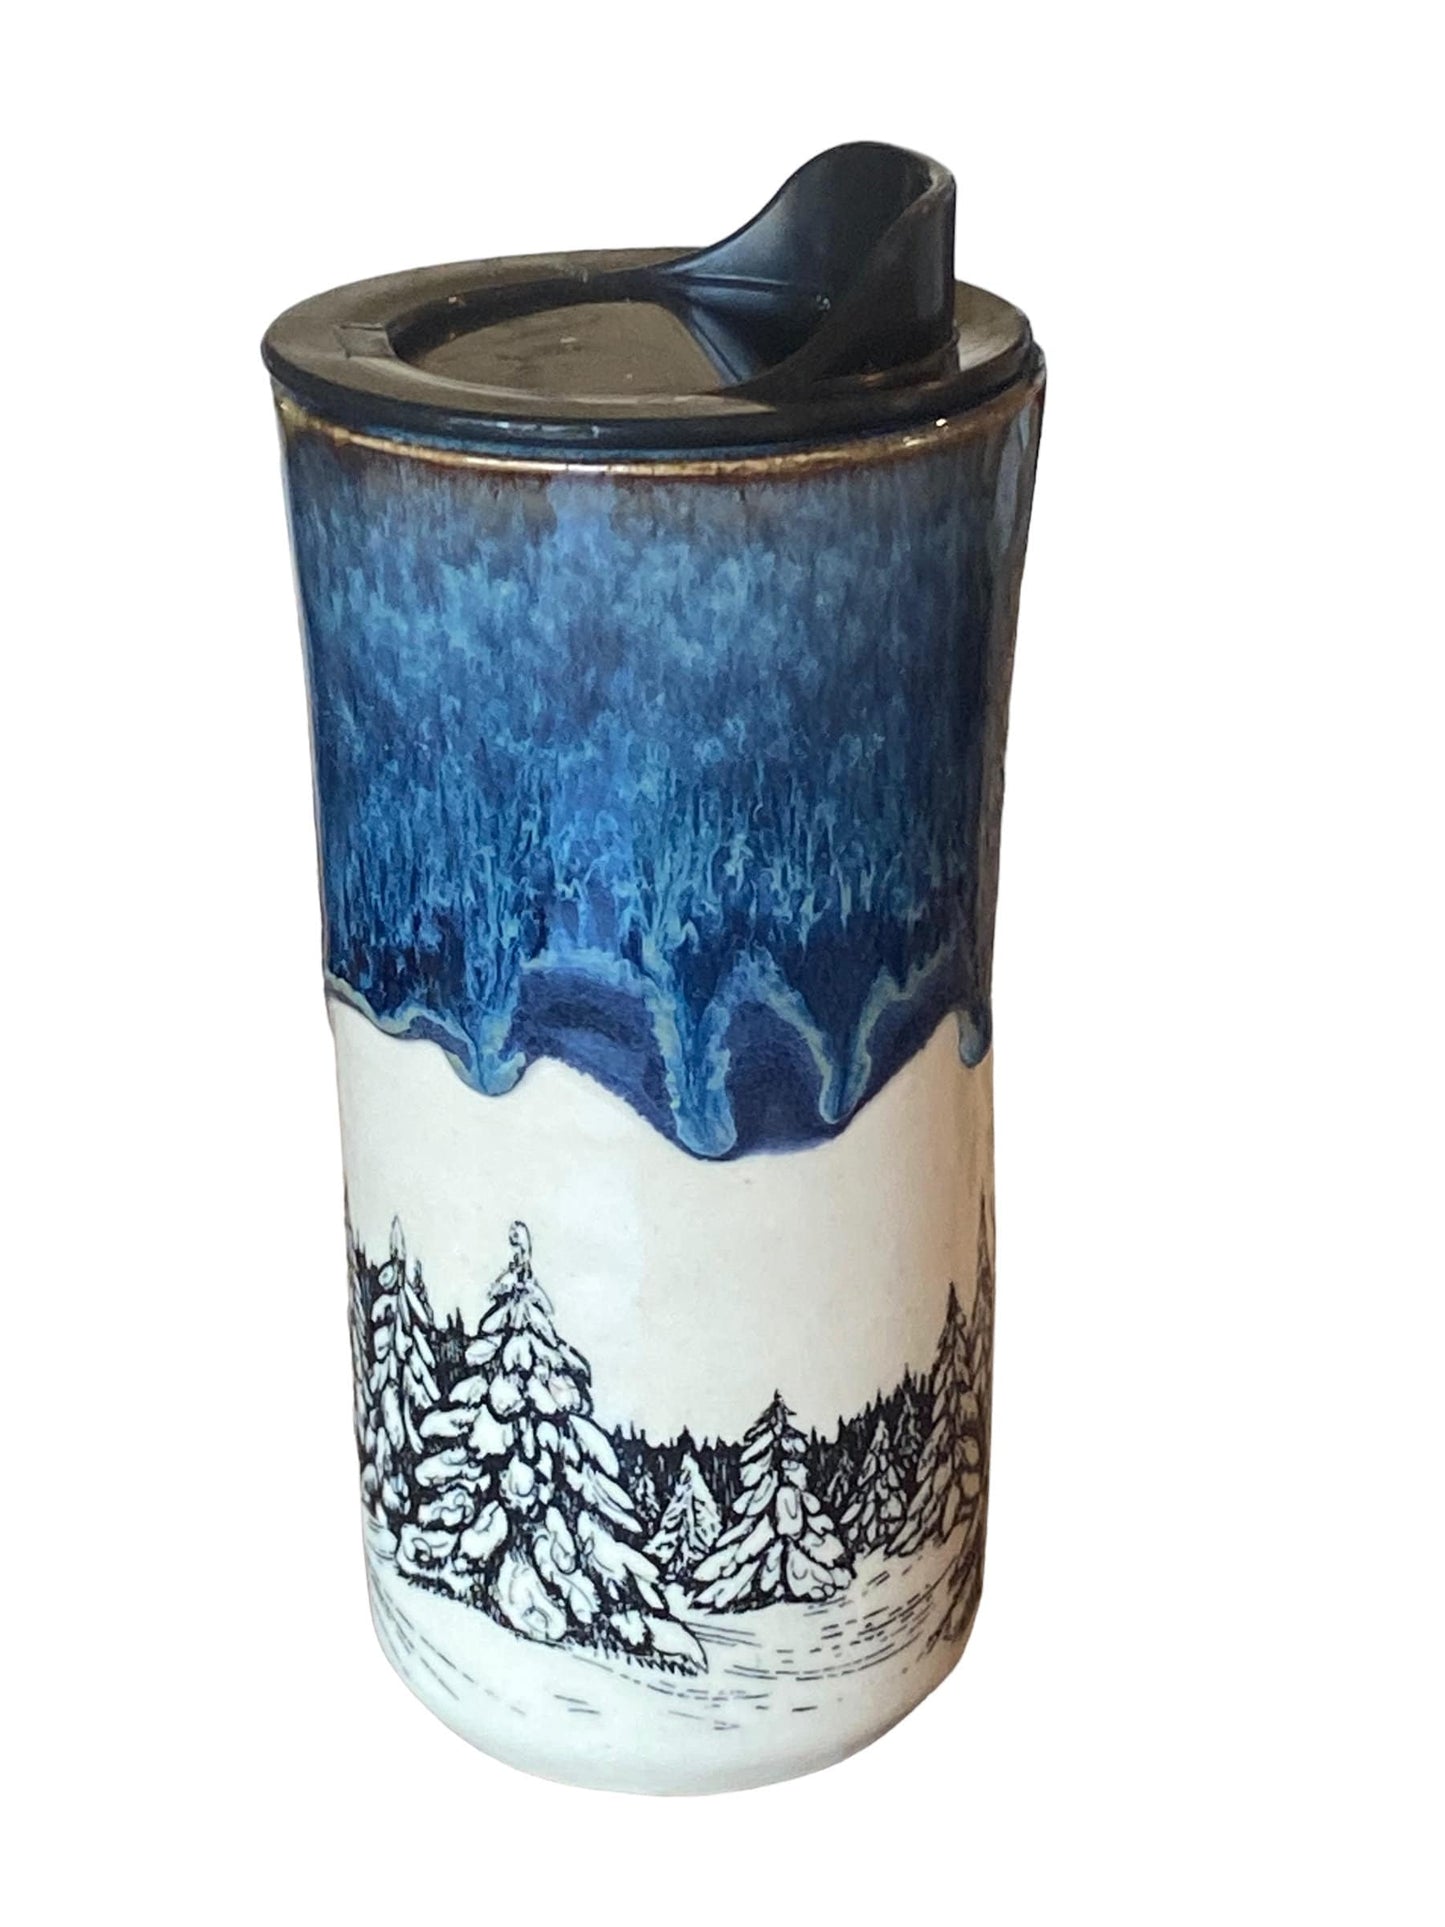 Large Travel Mug with Locking Lid Embellished with Pine Trees - Stylish and Secure Pottery for Nature-Loving Adventures